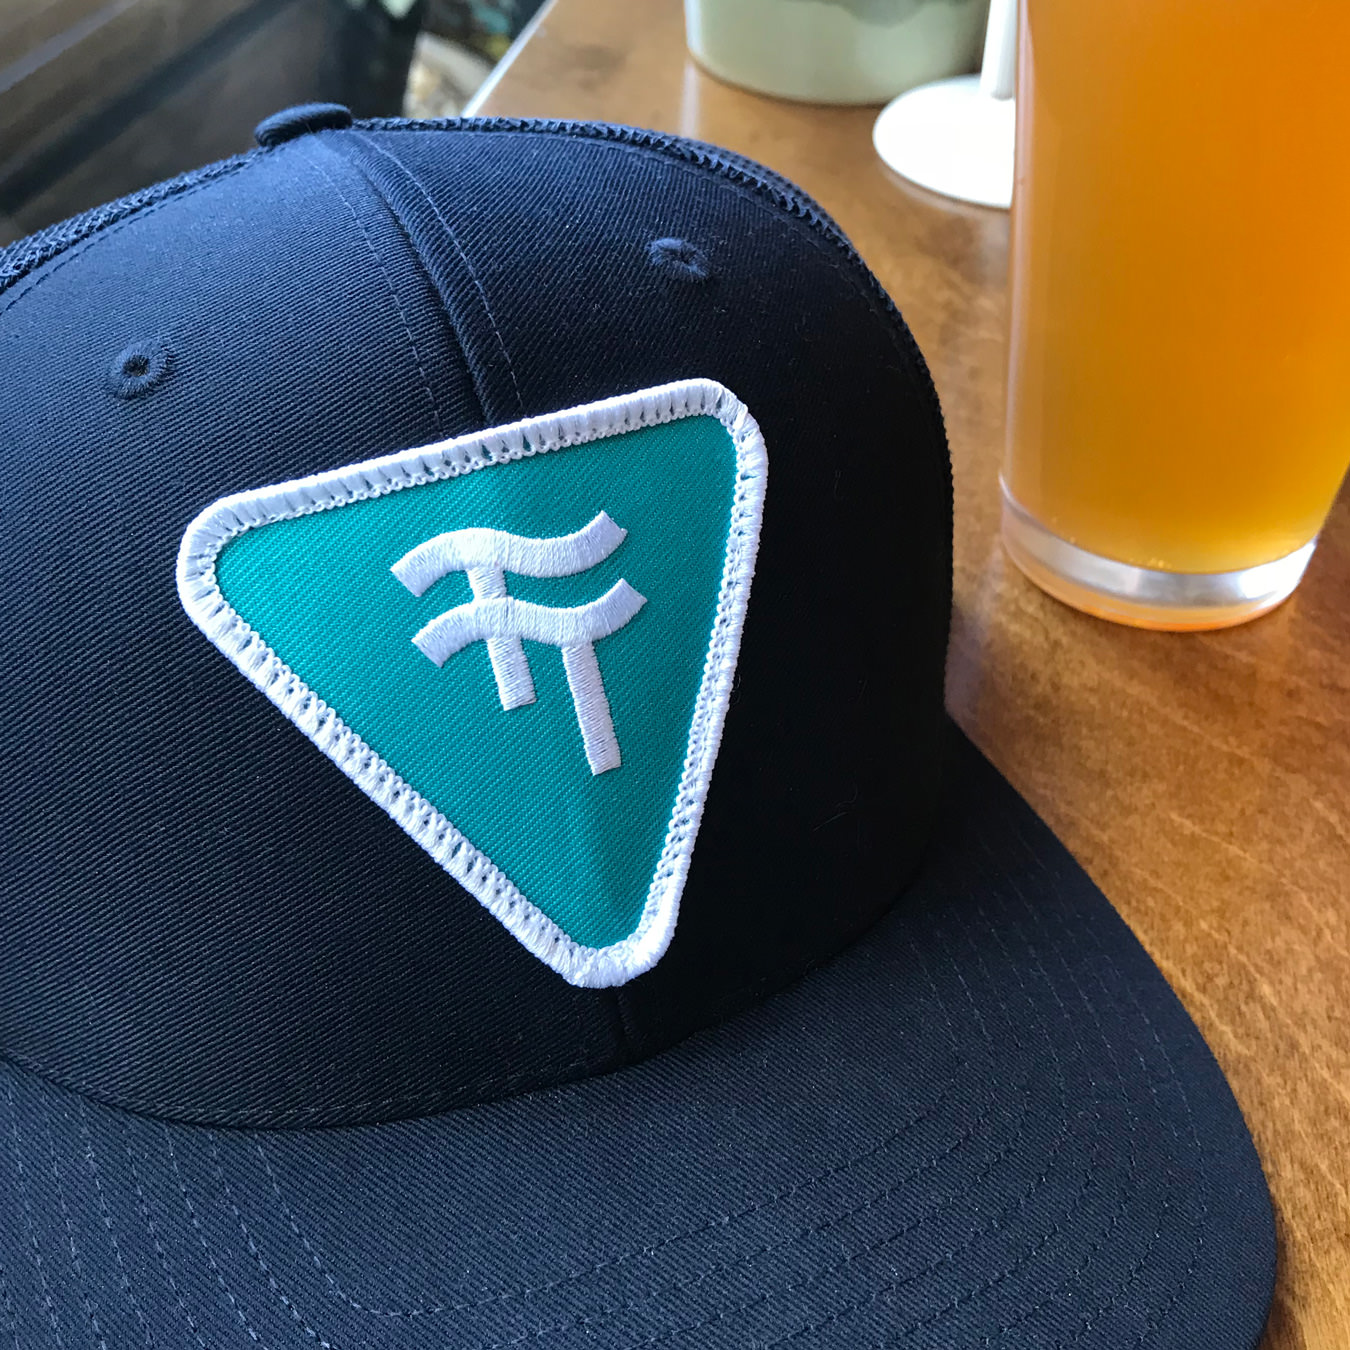 A photograph of a Two Tides Brewing Co. hat.